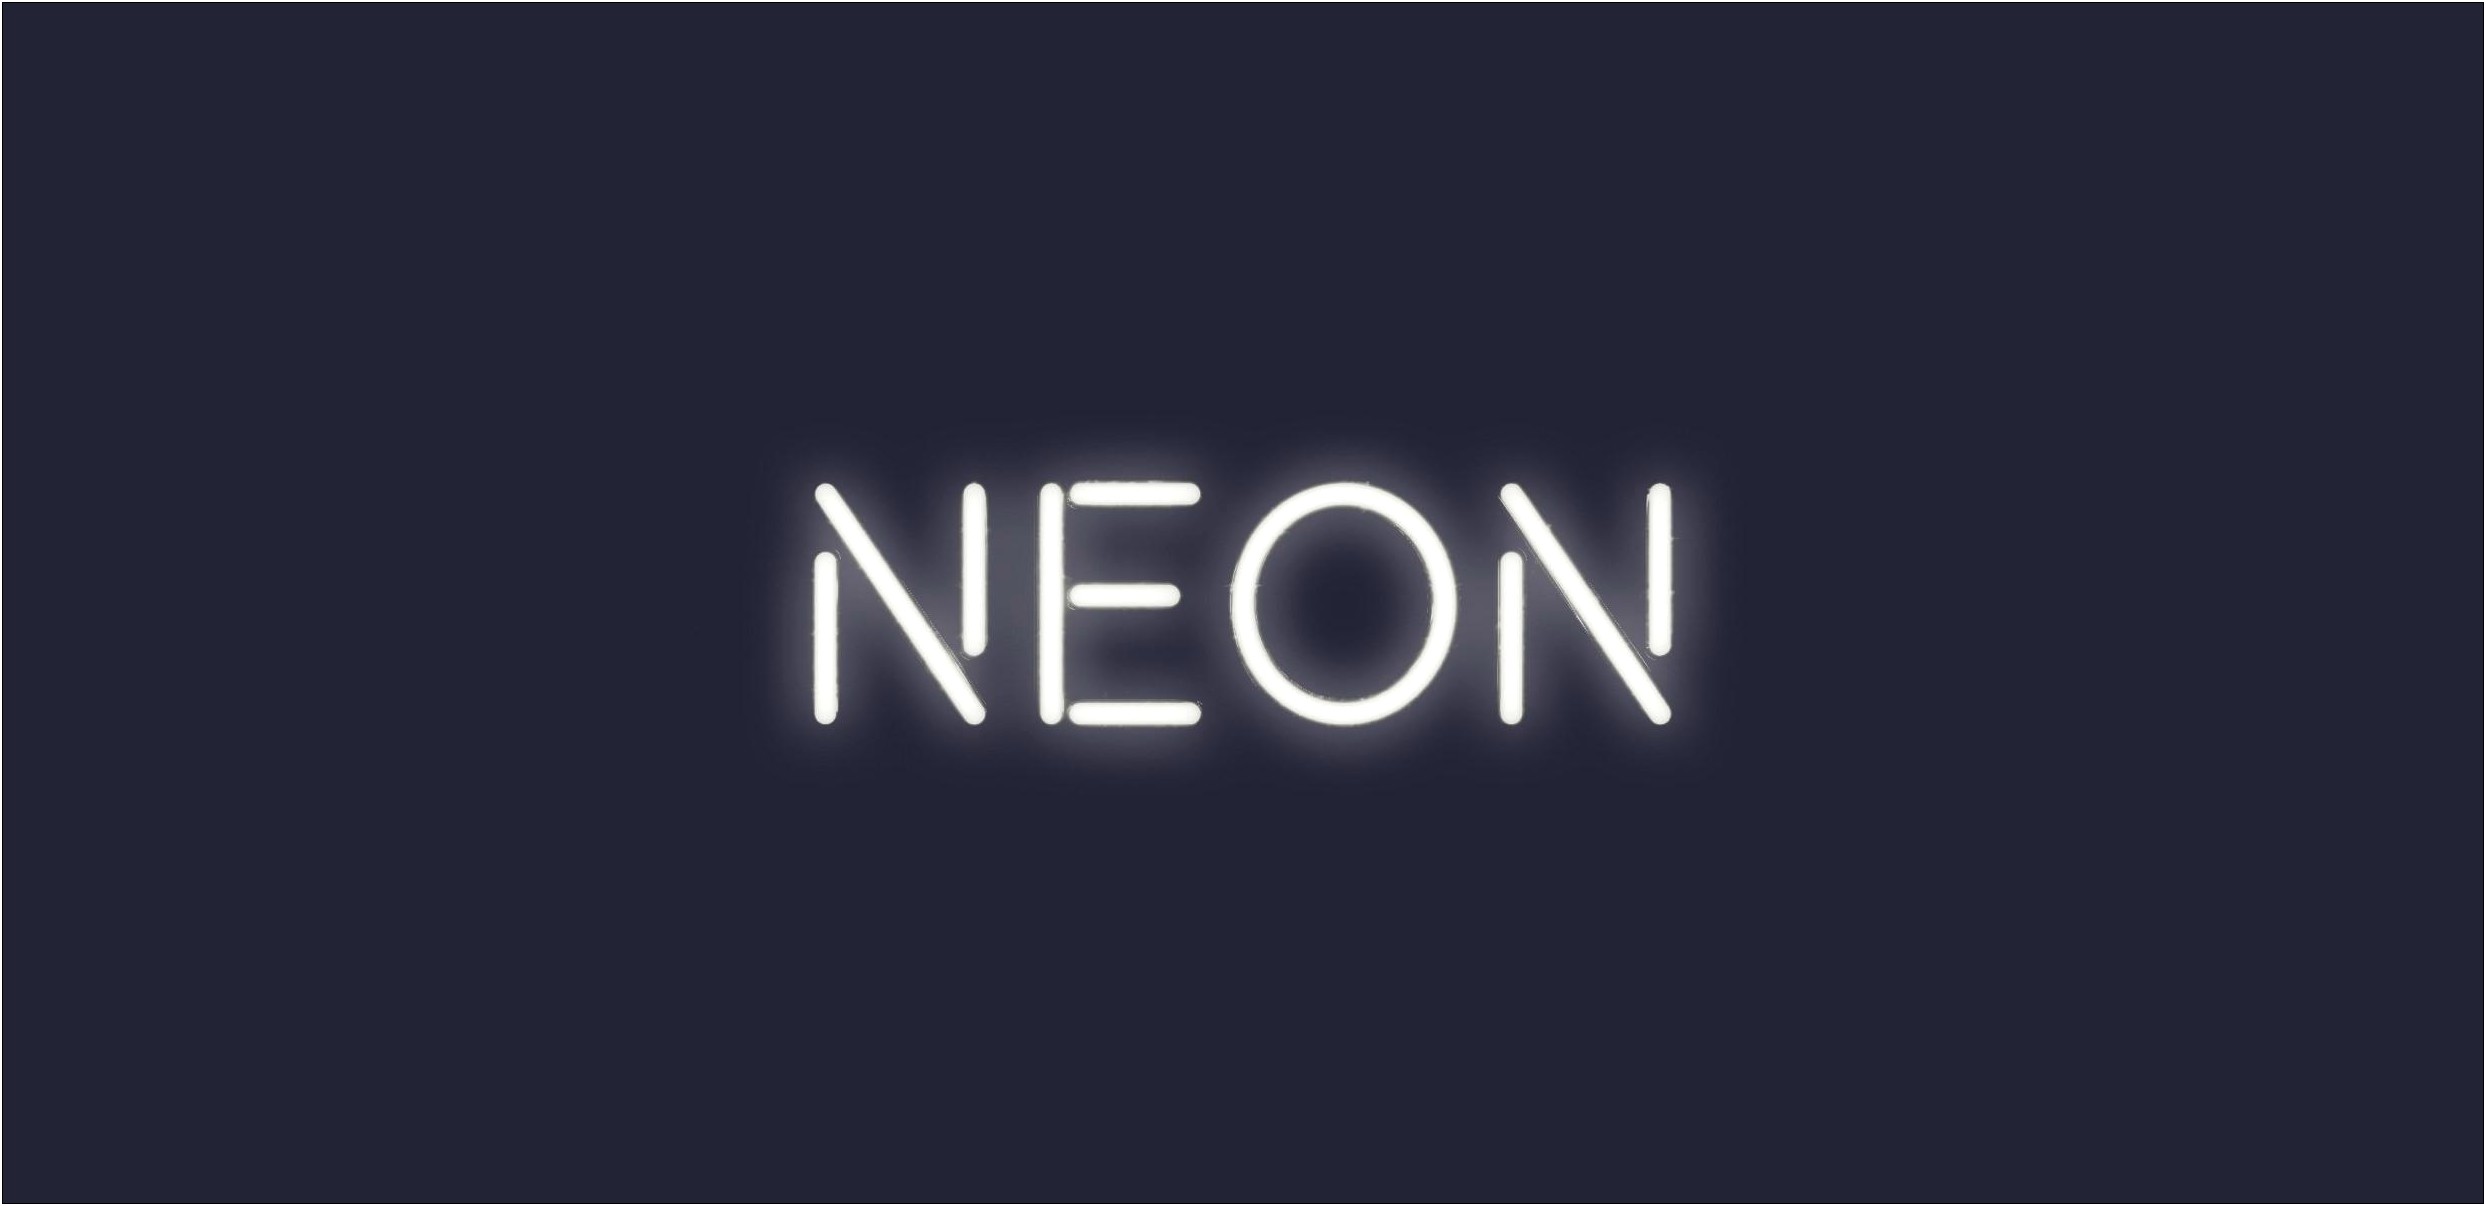 Neon Text After Effects Template Free